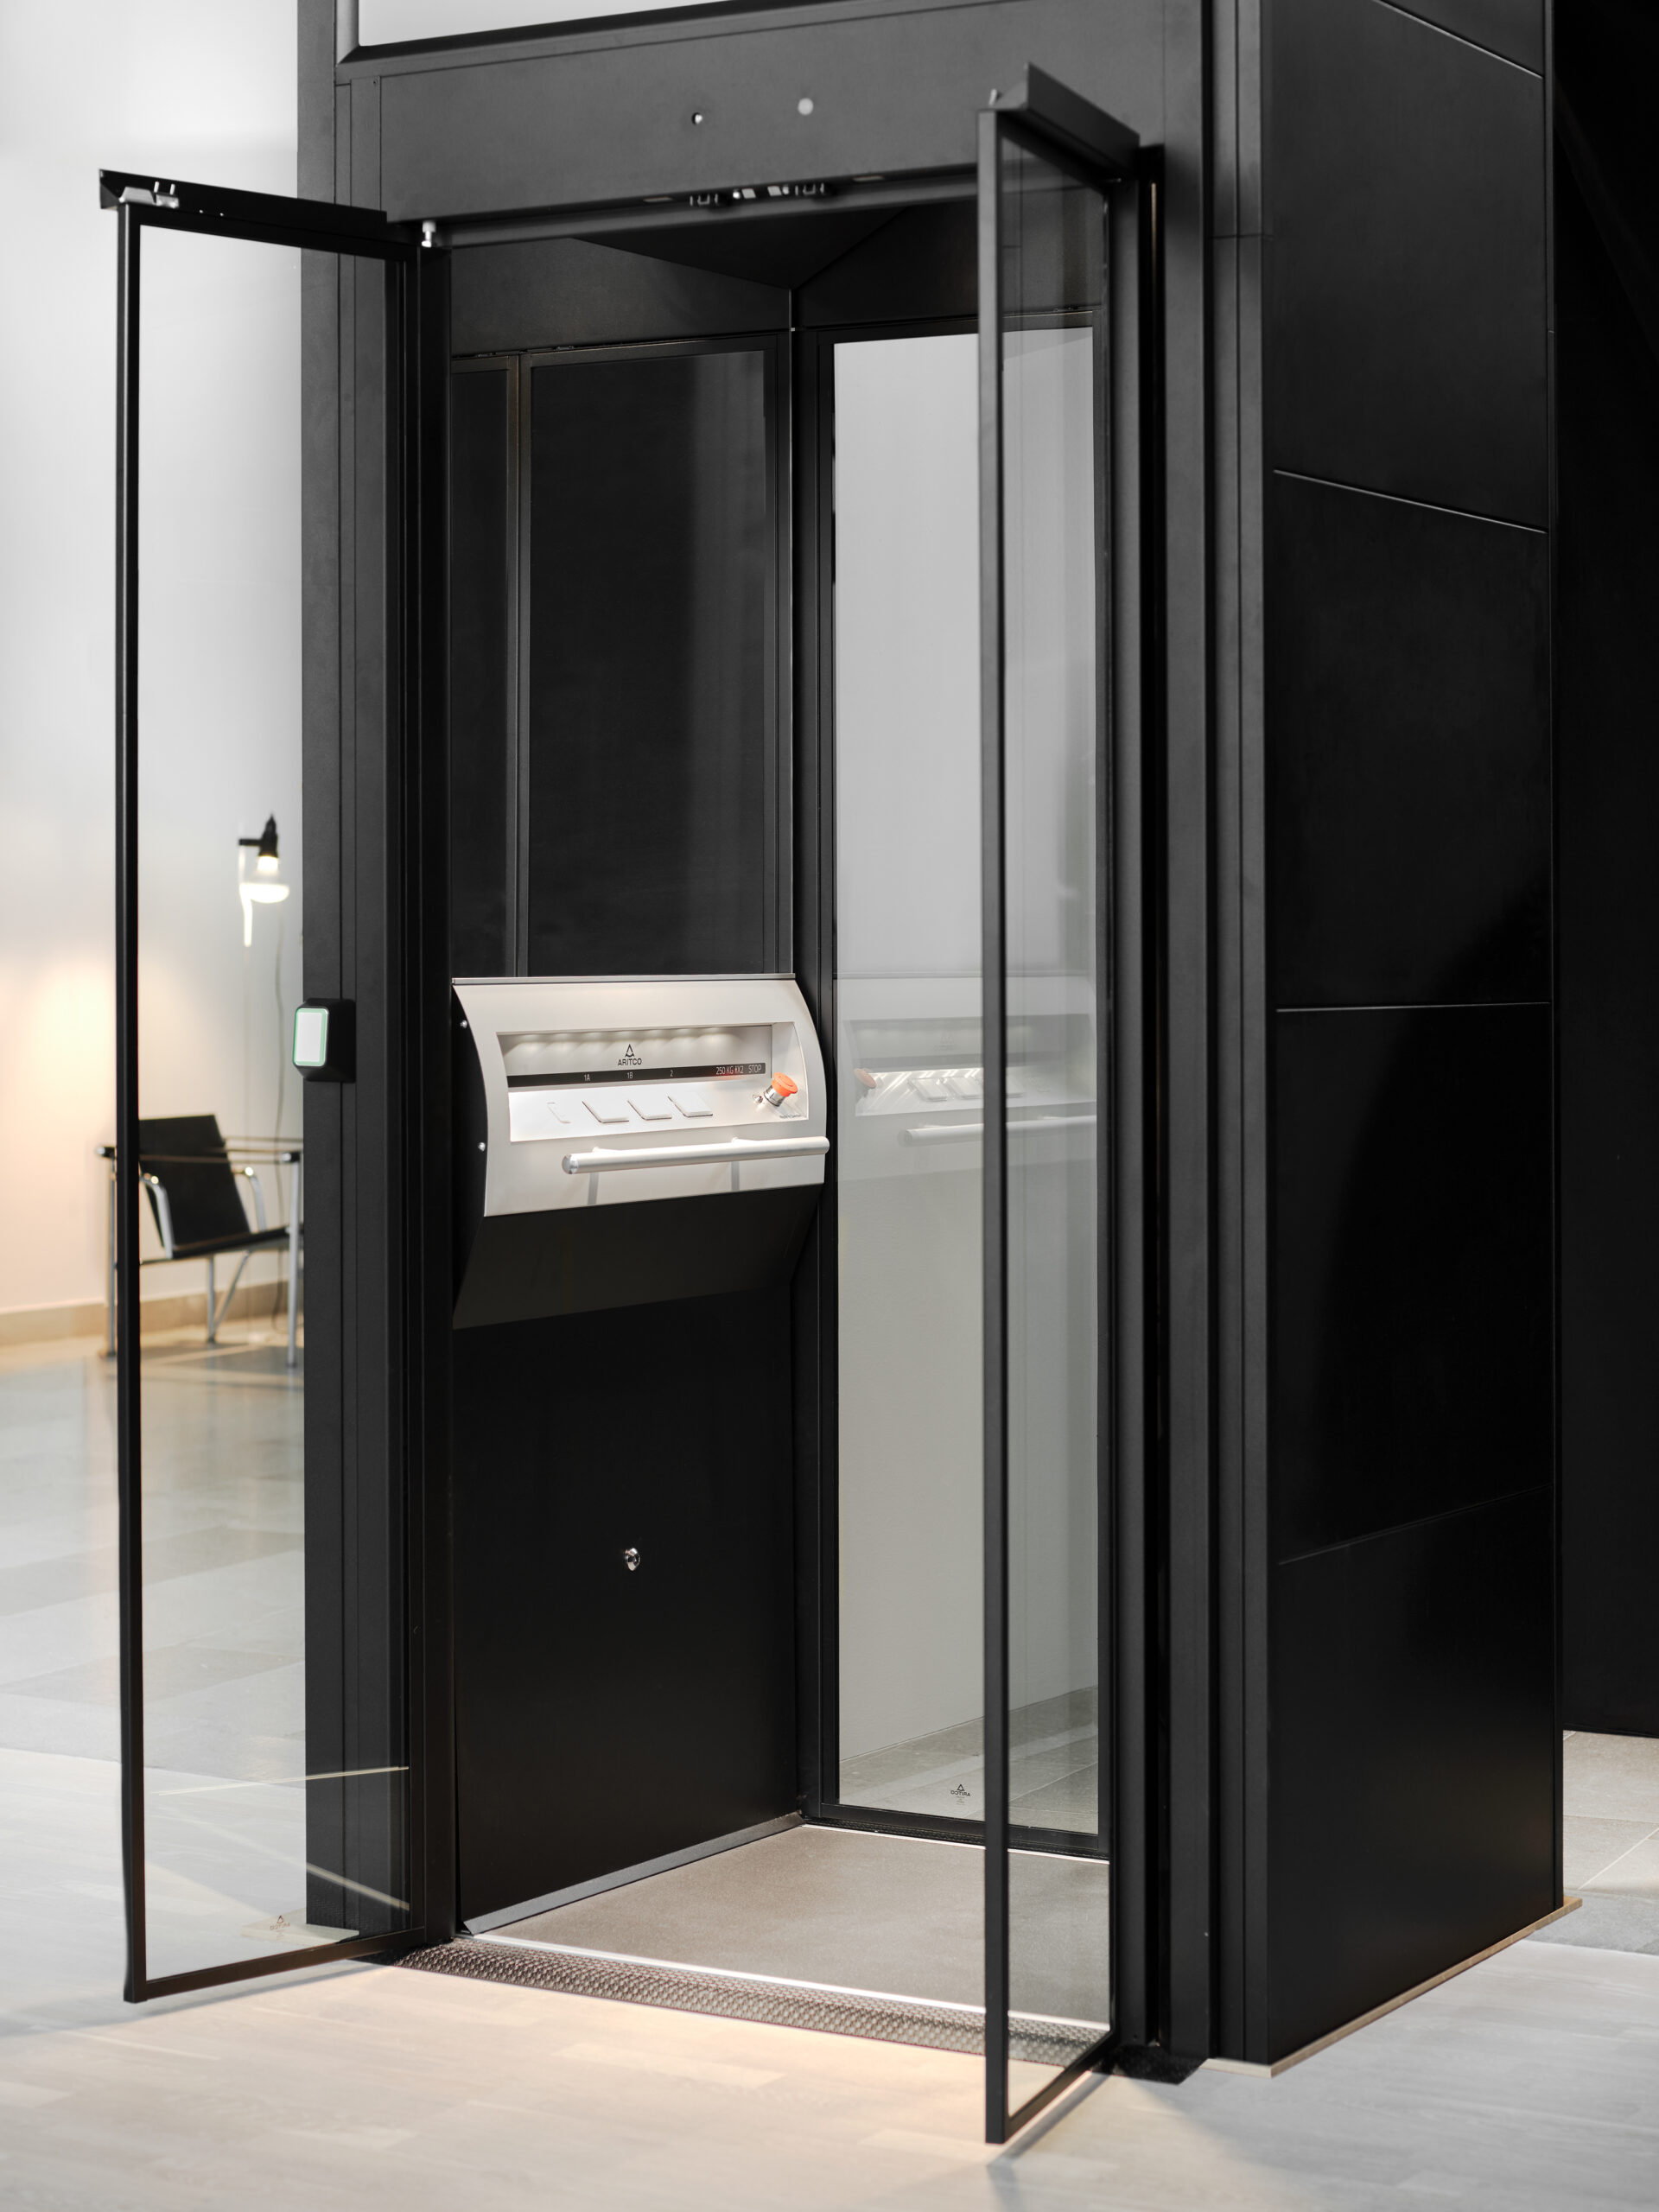 Invalifts launches Compact Home Lift @invalifts